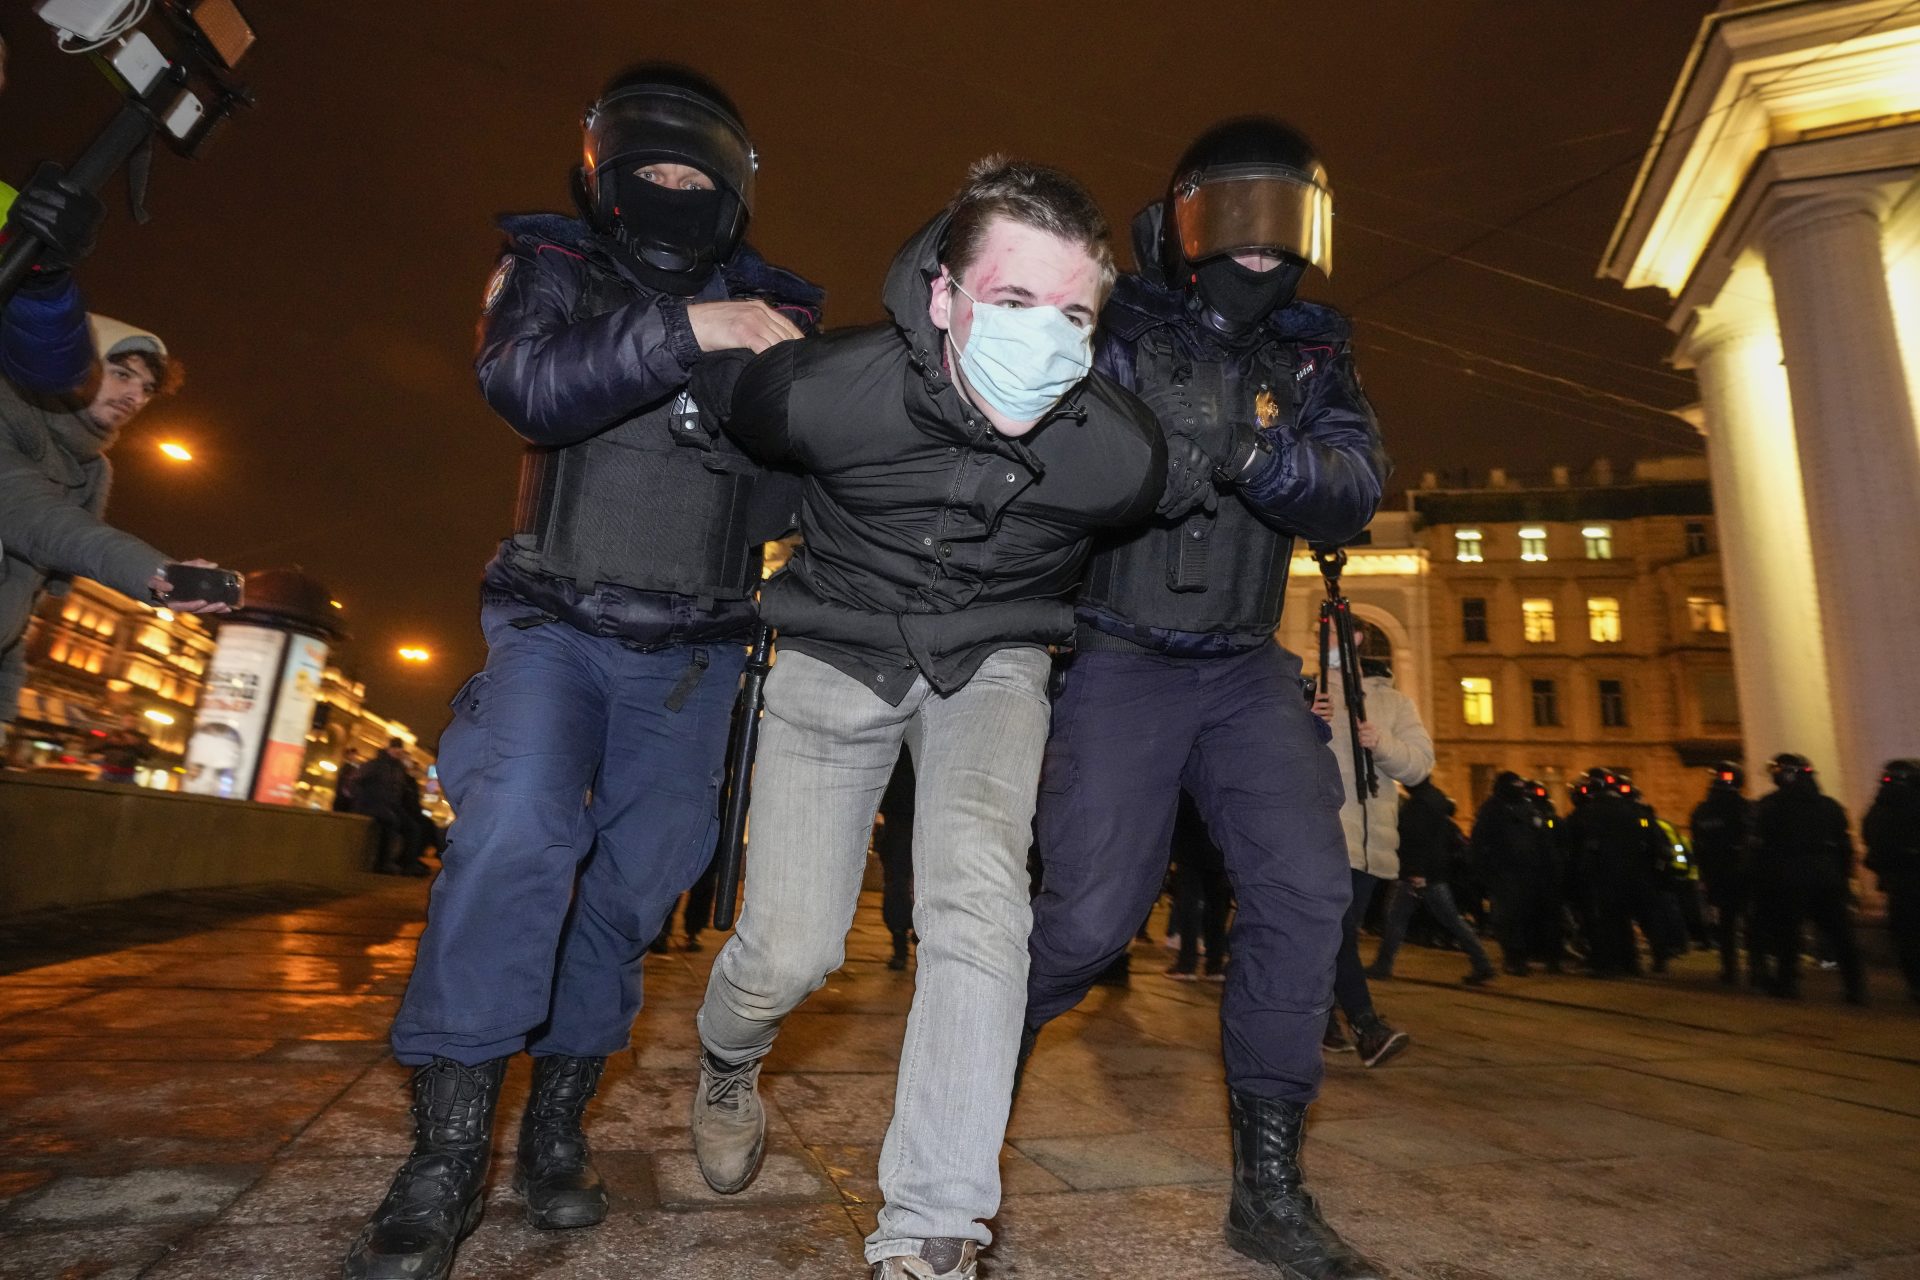 Police detain a demonstrator during an action against Russia's attack on Ukraine in St. Petersburg, Russia, Wednesday, March 2, 2022. Protests against the Russian invasion of Ukraine resumed on Wednesday, with people taking to the streets of Moscow and St. Petersburg and other Russian towns despite mass arrests.